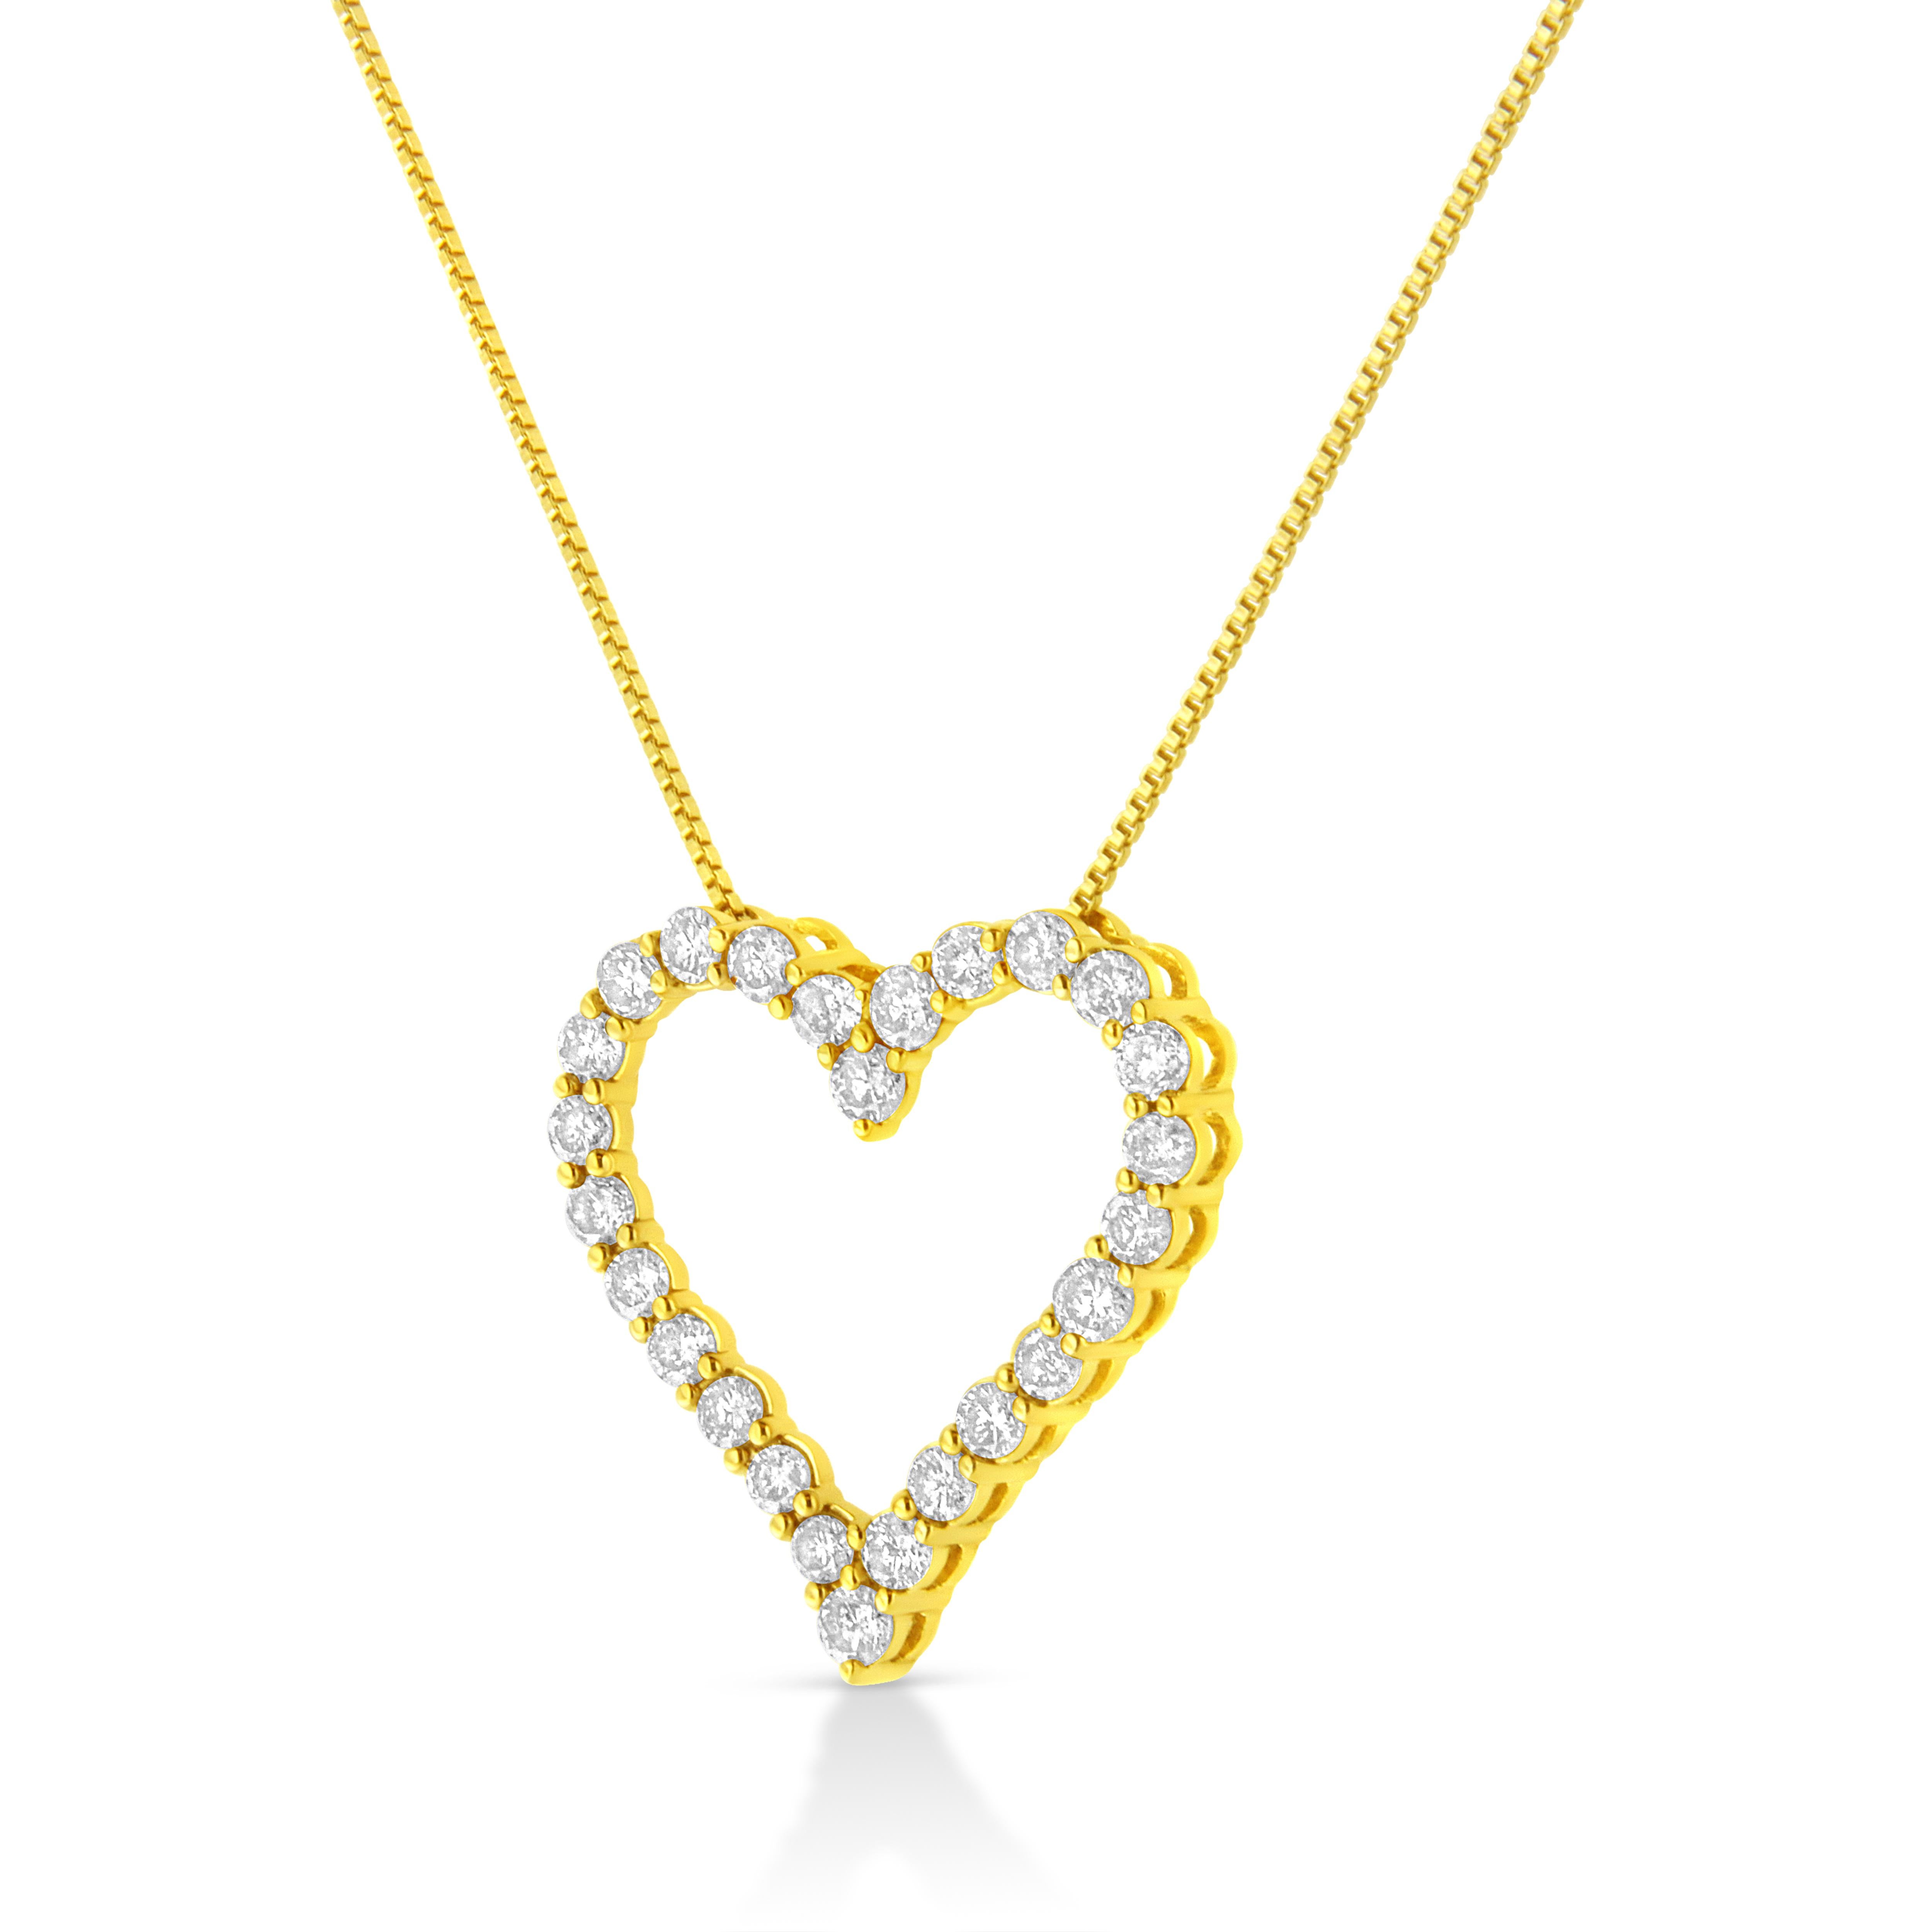 Contemporary Yellow Gold Plated Sterling Silver 2.00 Carat Diamond Heart Pendant Necklace For Sale